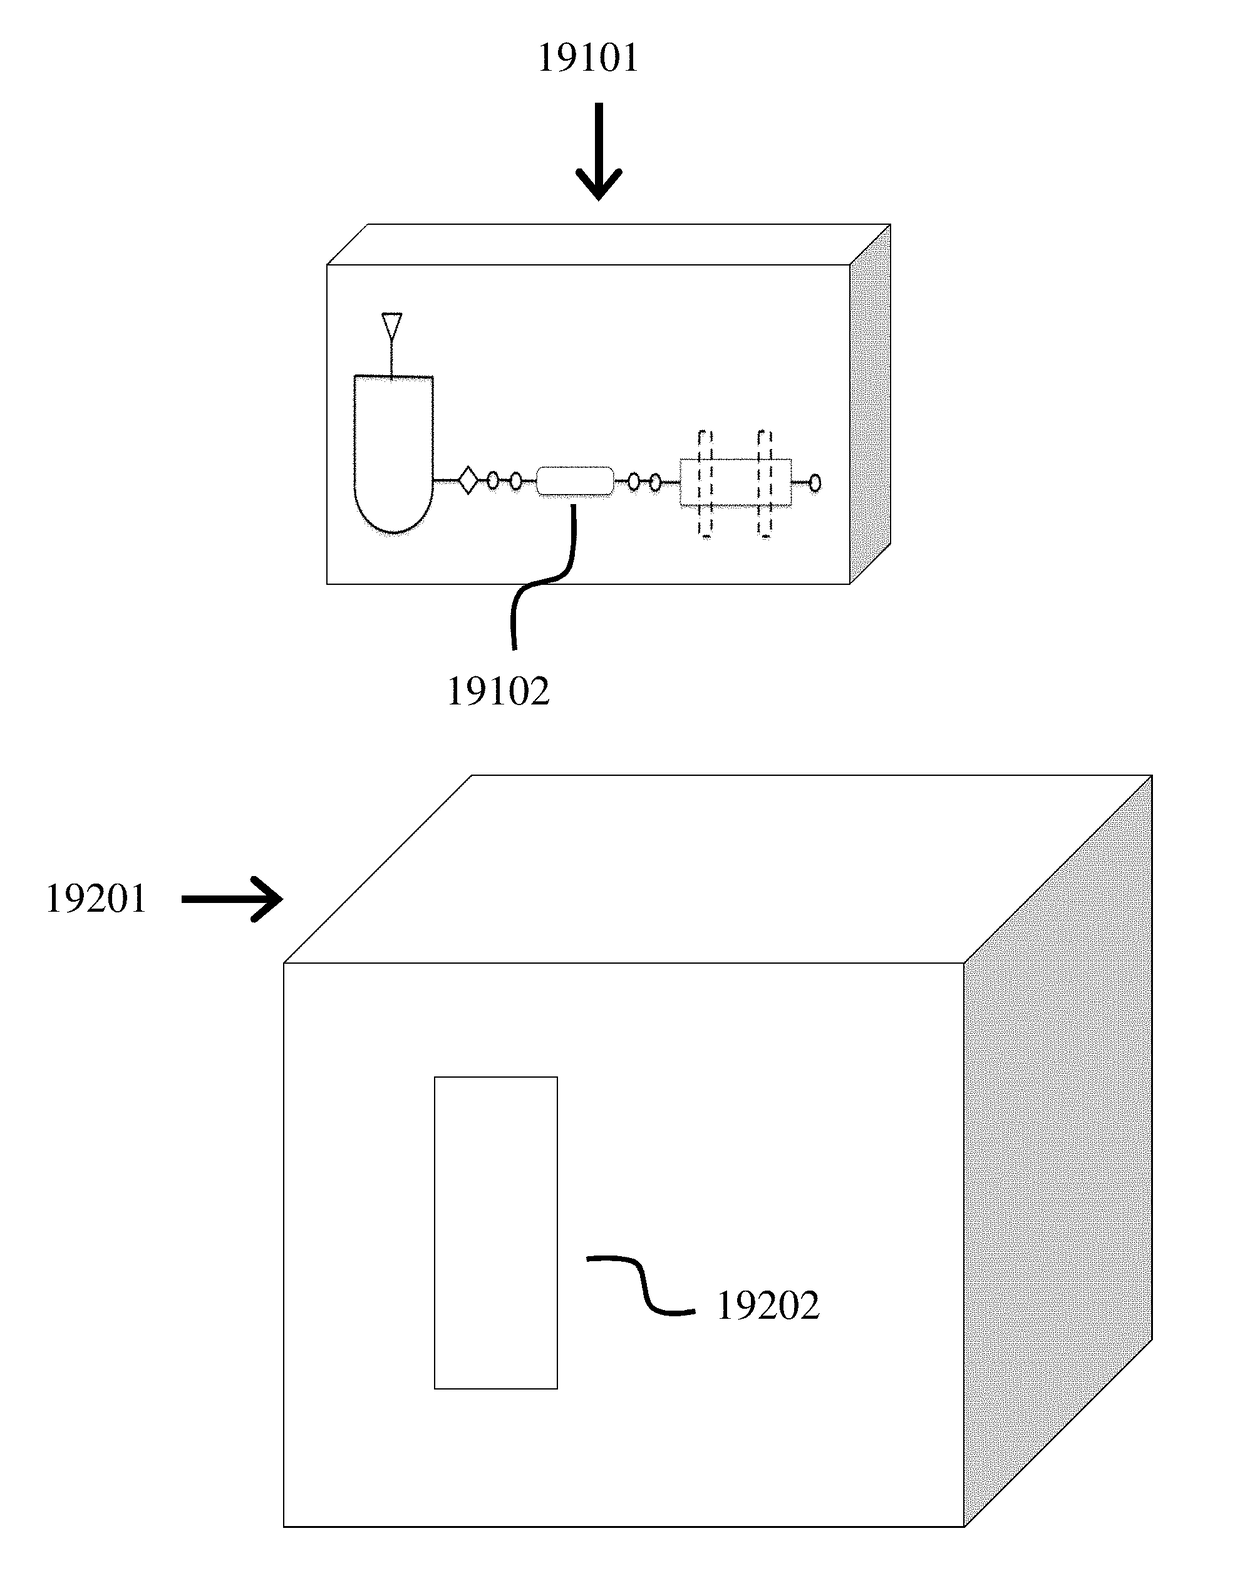 Fluidic cartridge for cytometry and additional analysis